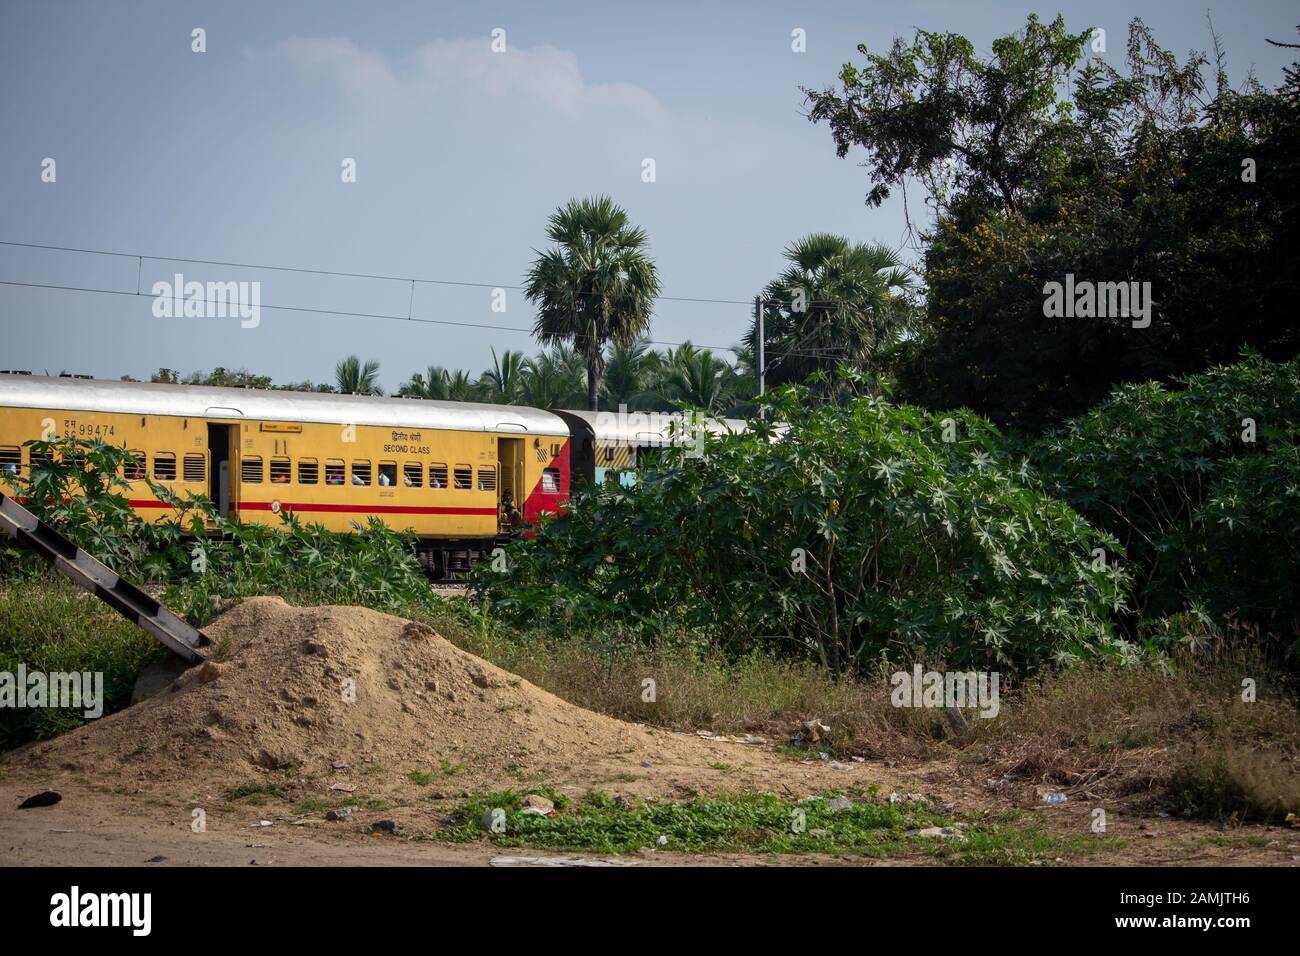 Ranipet, Tamil Nadu / India - January 04 2020: An Indian passenger train passing through a level crossing . Stock Photo